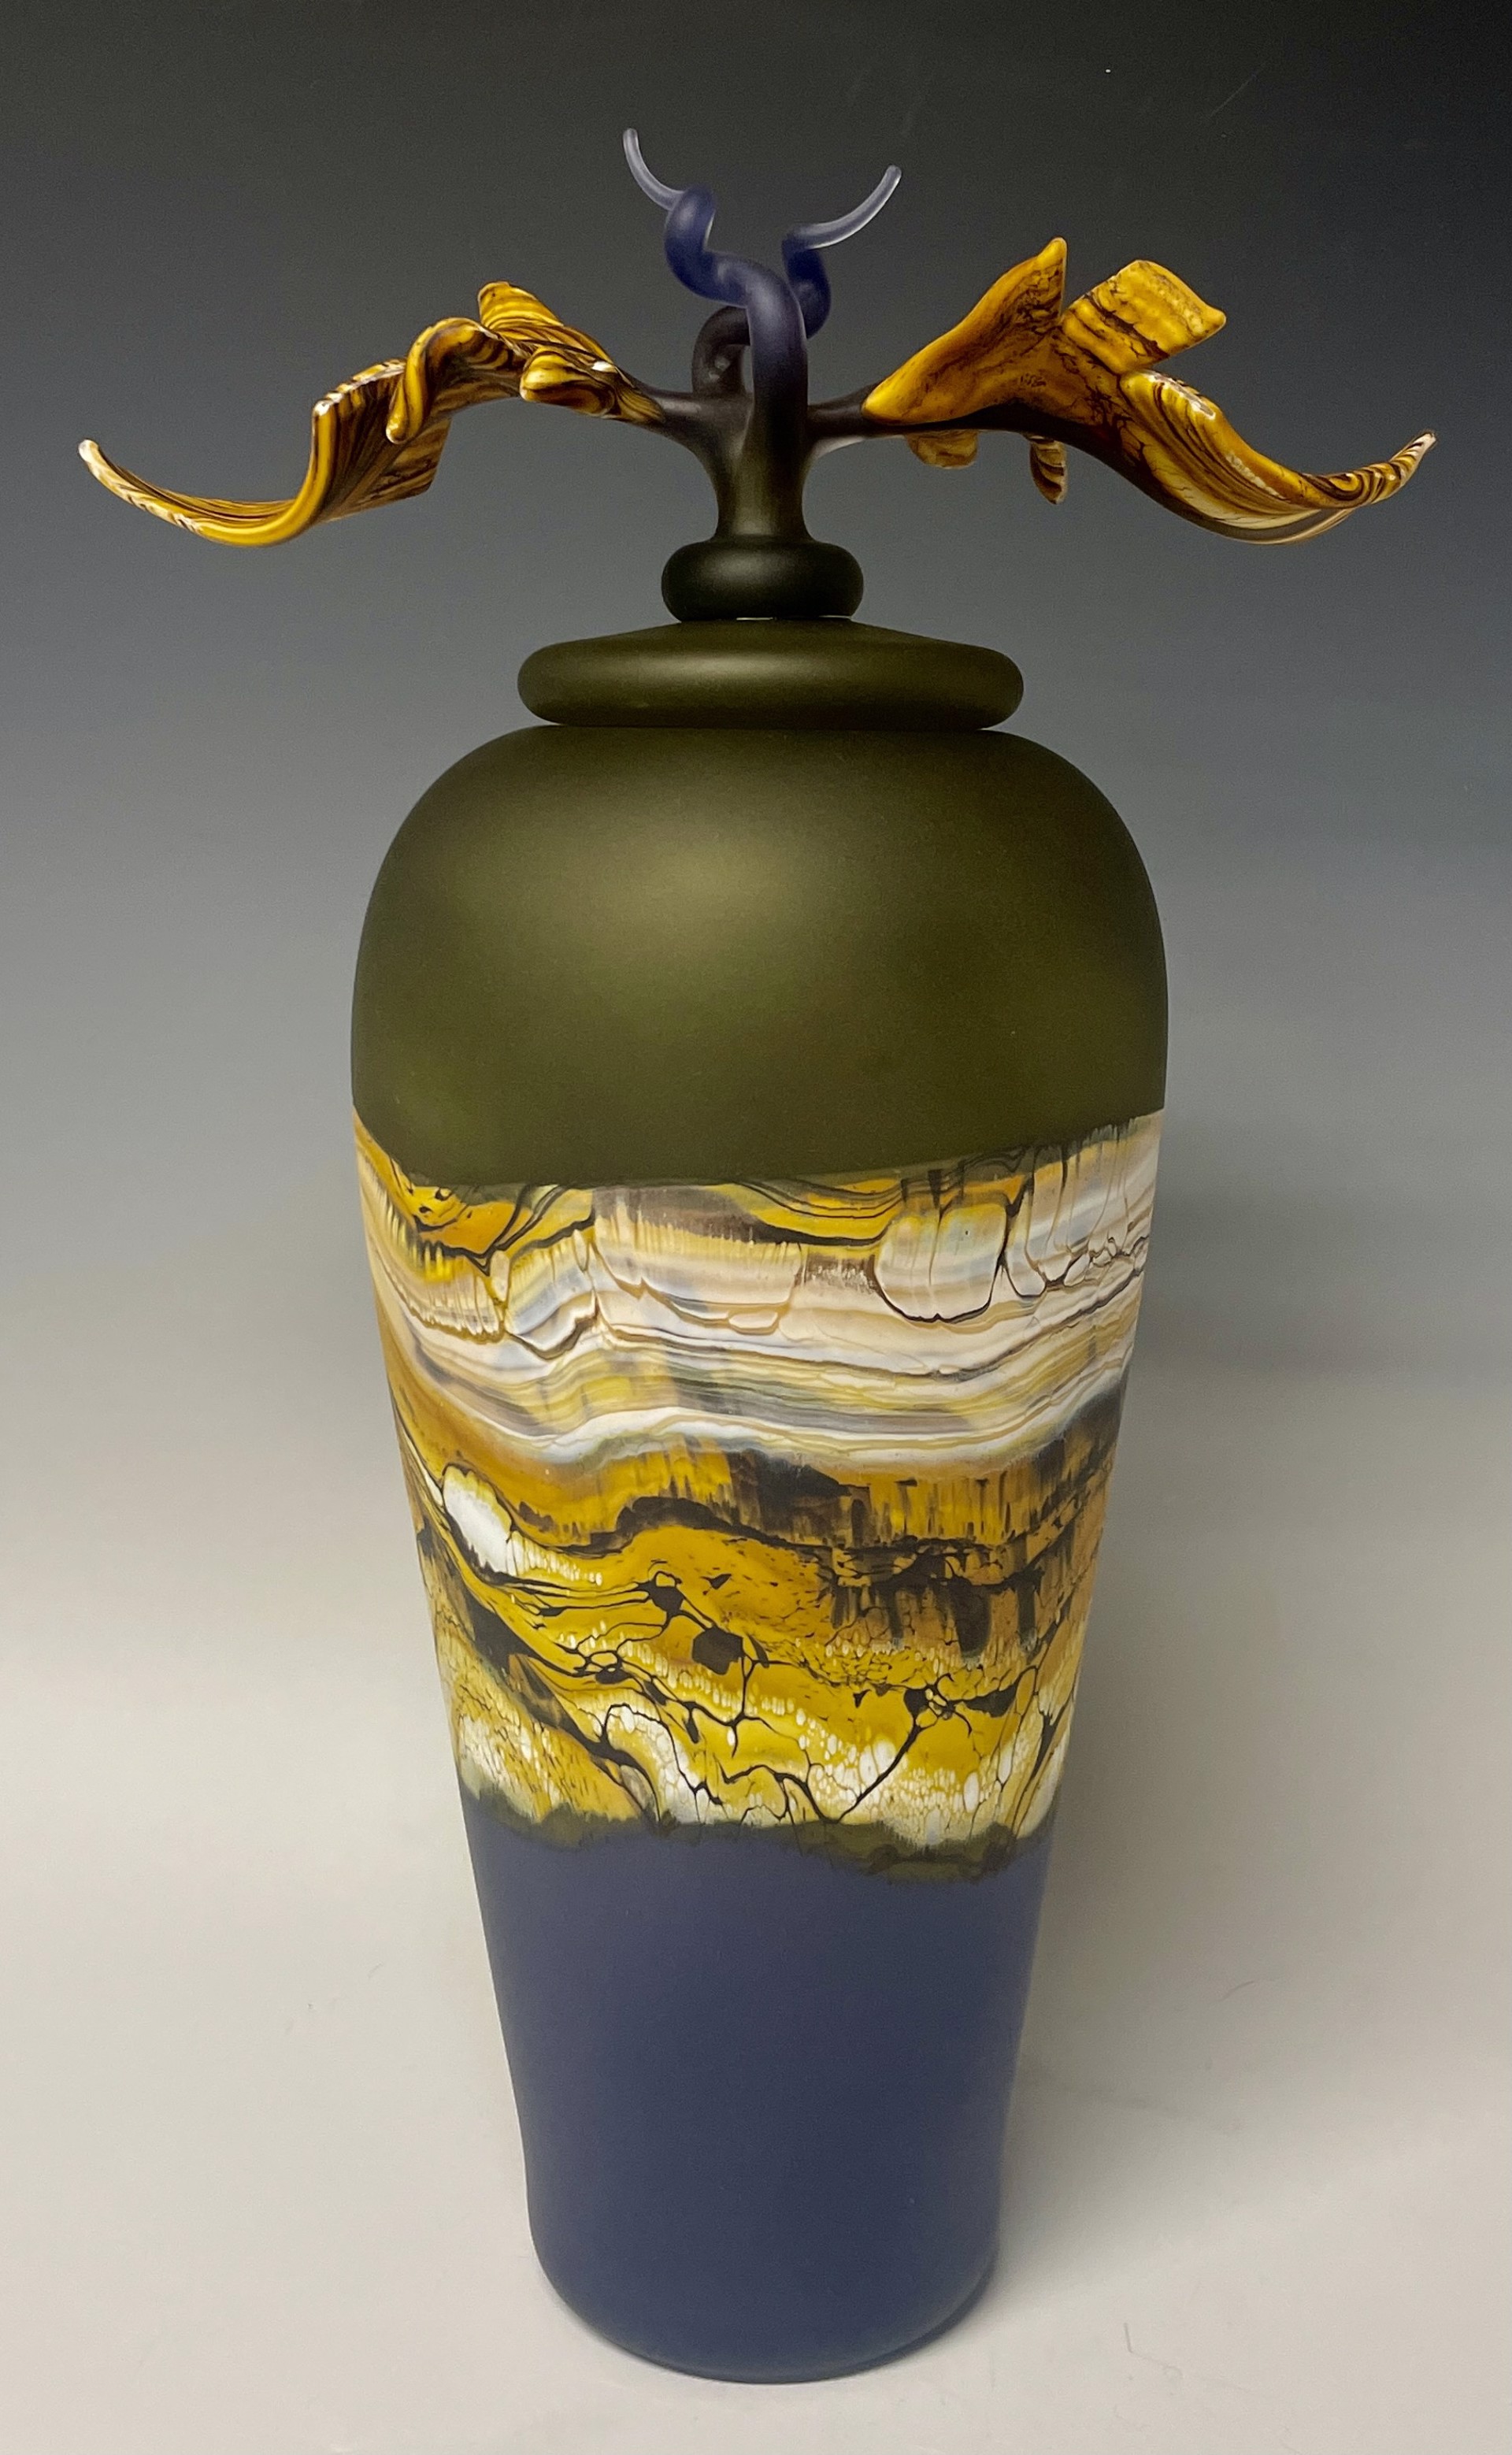 Translucent Covered Vase ~ Lavender and Green with Lavender and Gold Finial Lid by Danielle Blade Stephen Gartner